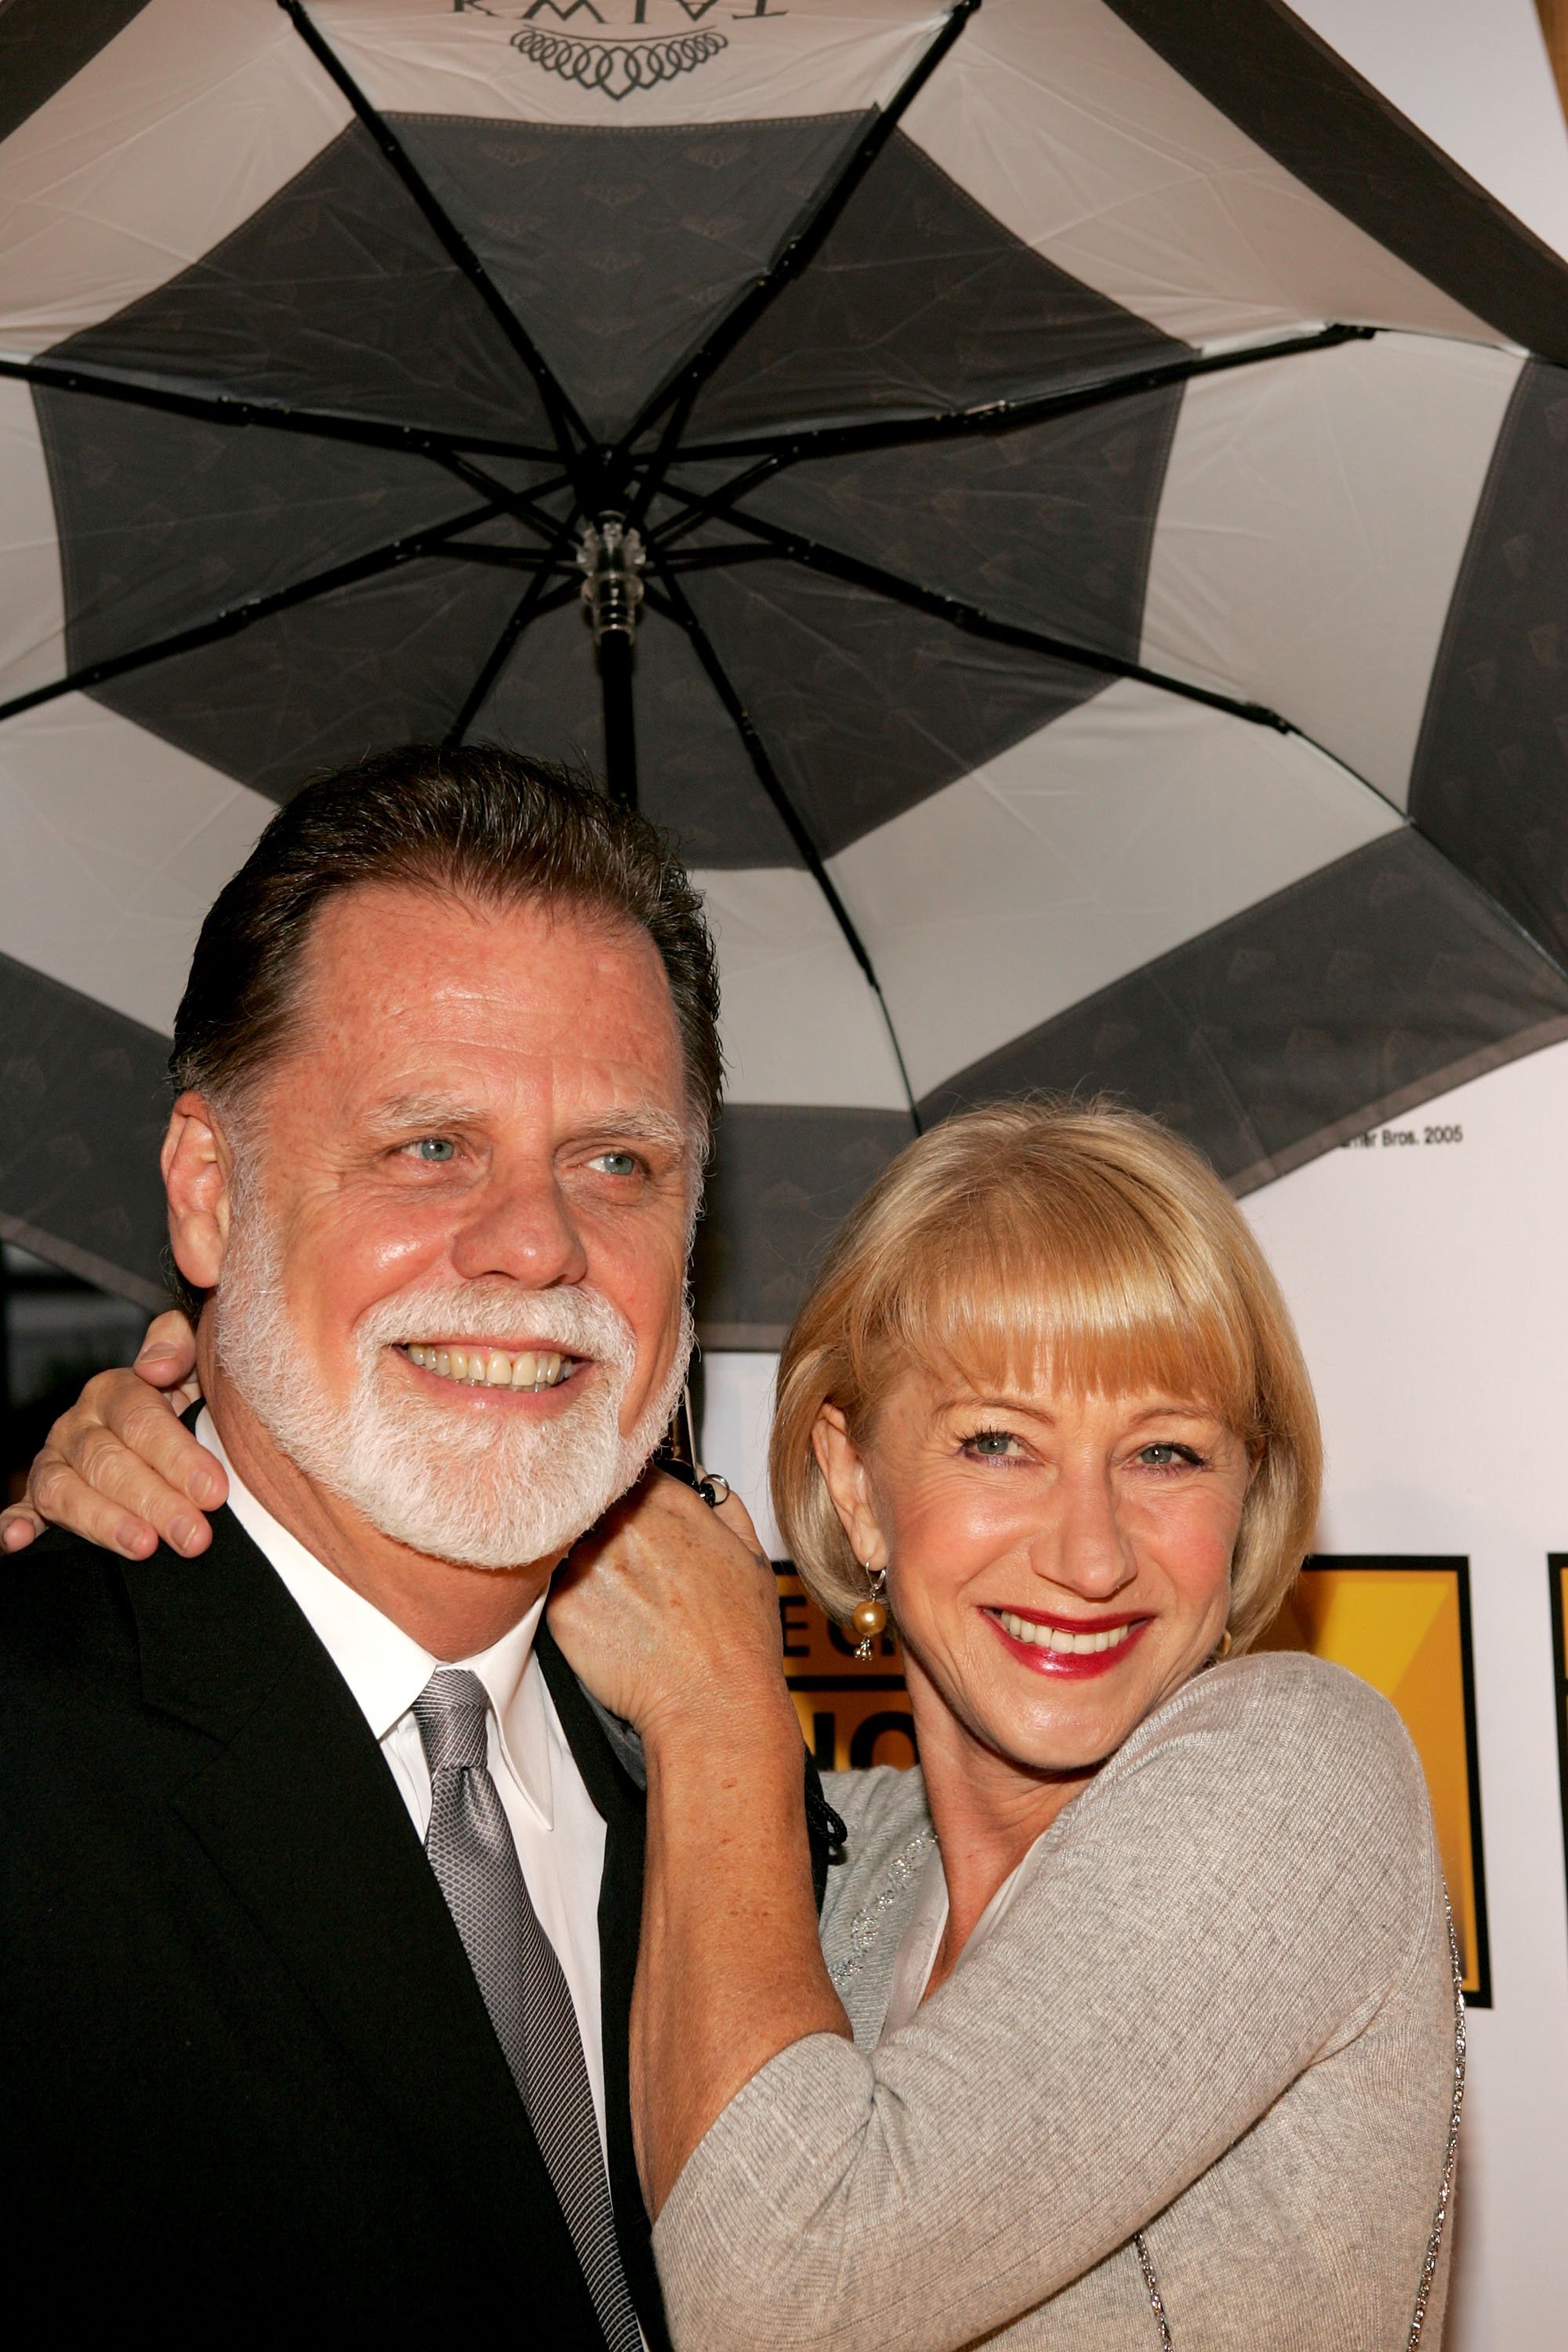 Taylor Hackford and Helen Mirren at the 10th Annual Critics' Choice Awards on January 10, 2005, in Los Angeles, California. | Source: Vince Bucci/Getty Images